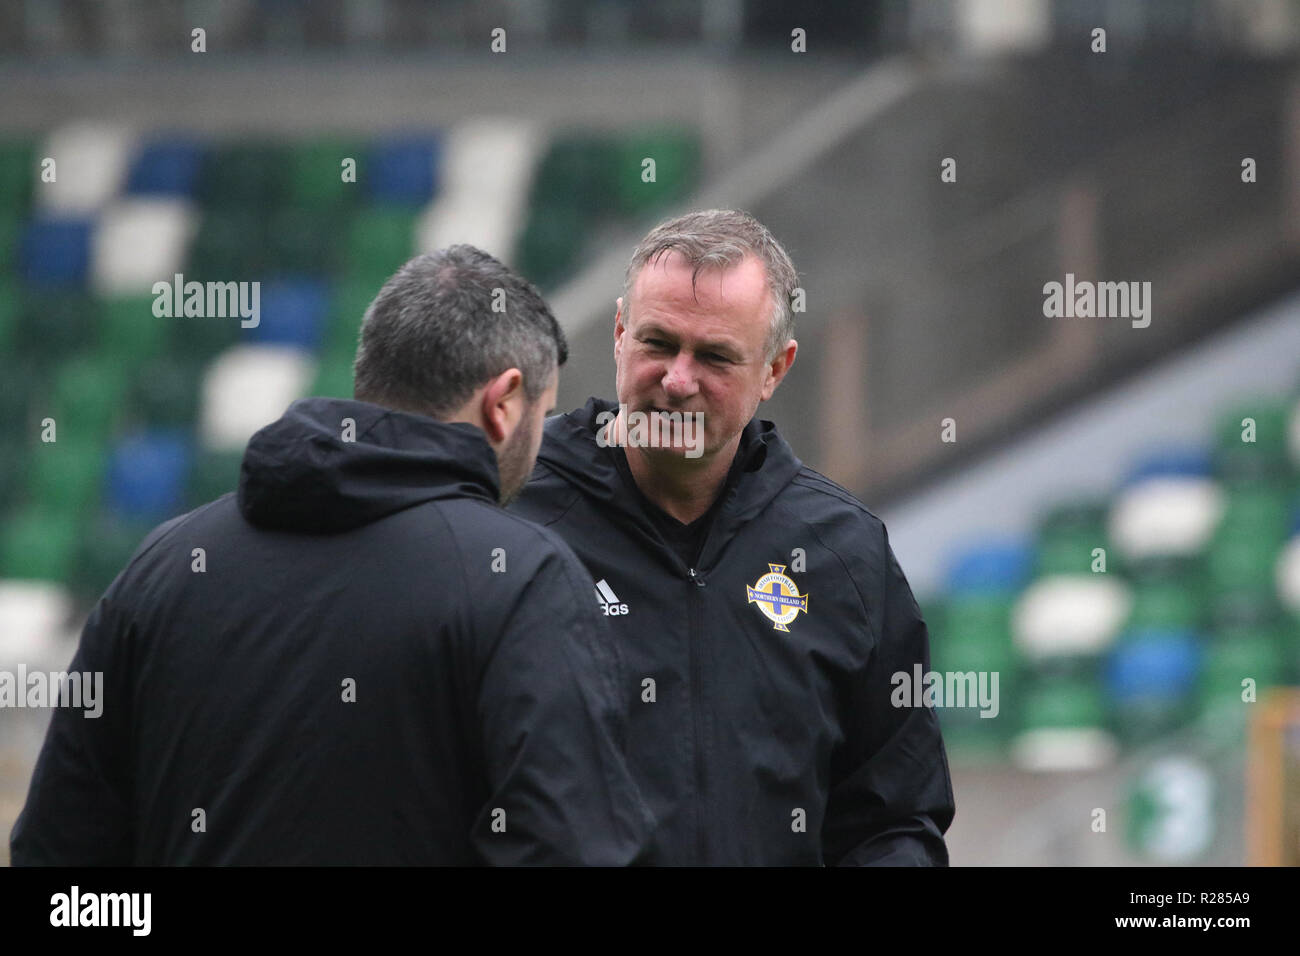 Windsor Park, Belfast, Northern Ireland.17 November 2018. Northern Ireland training in Belfast this morning ahead of their UEFA Nations League game against Austria tomorrow night in the stadium. Northern ireland manager Michael O'Neill at training. Credit: David Hunter/Alamy Live News. Stock Photo